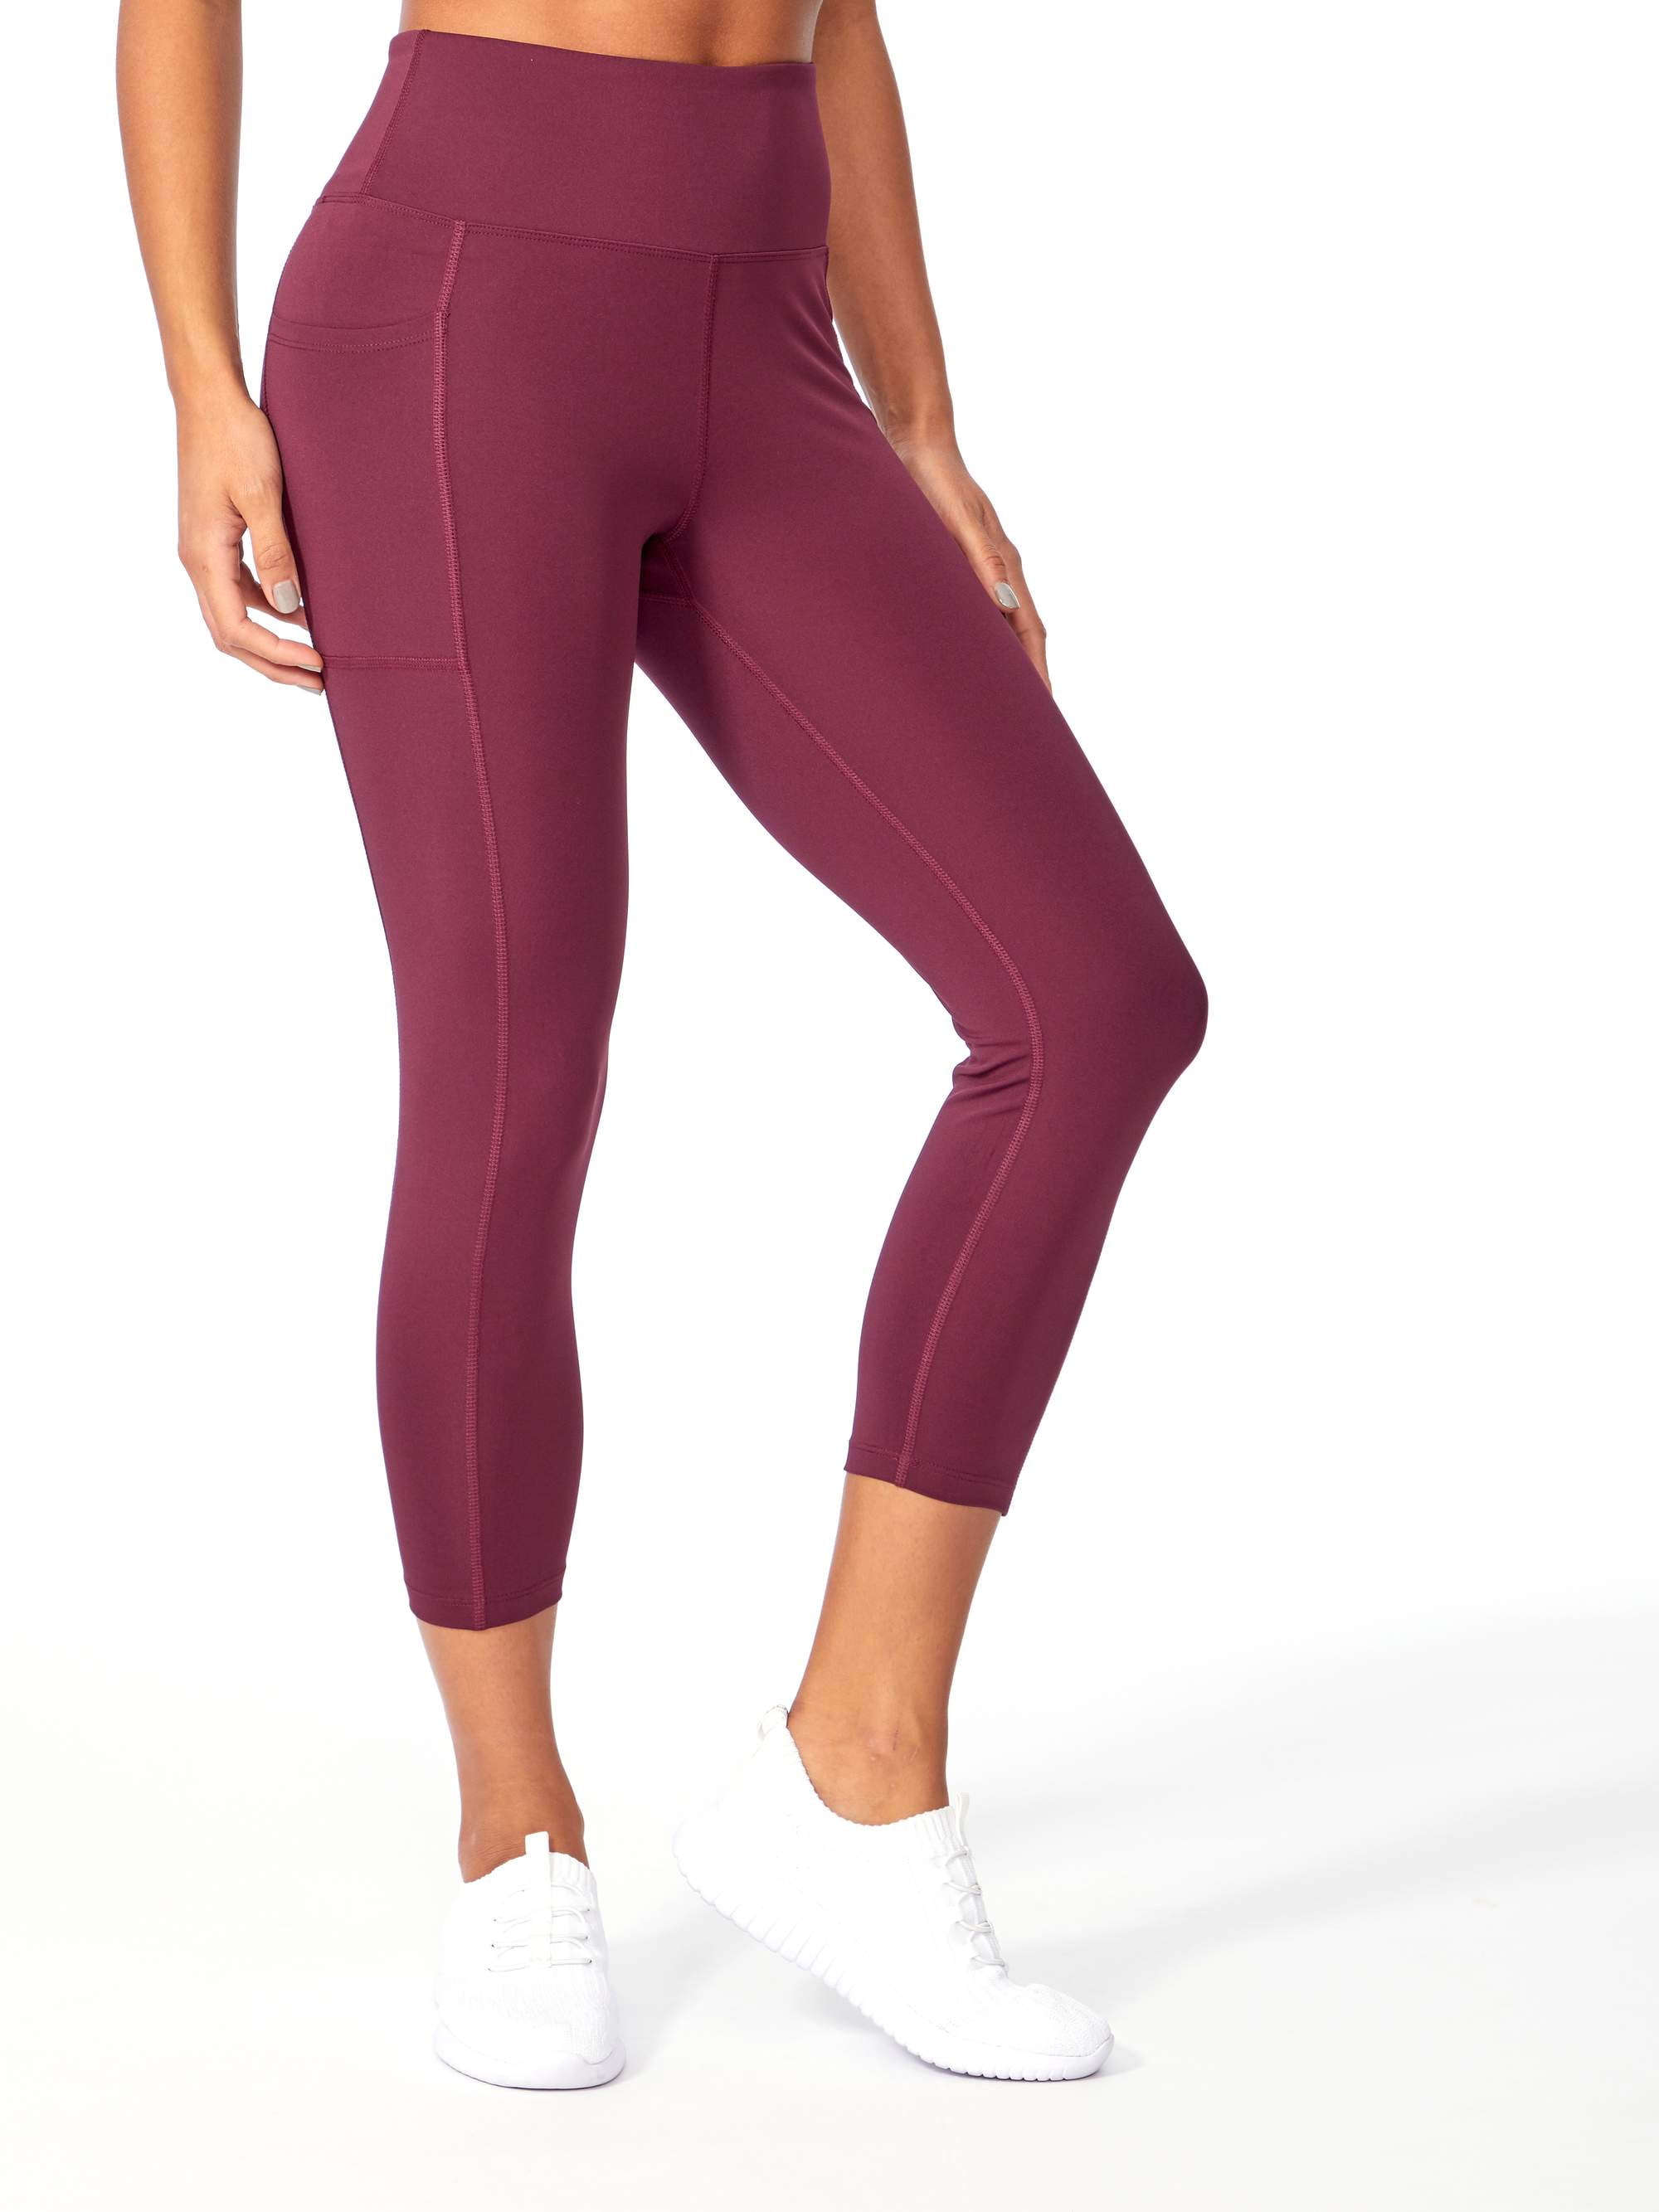 Buy Bally Total Fitness Kimmy High Rise Mid-Calf Legging, Sugar Coral,  X-Large at Amazon.in